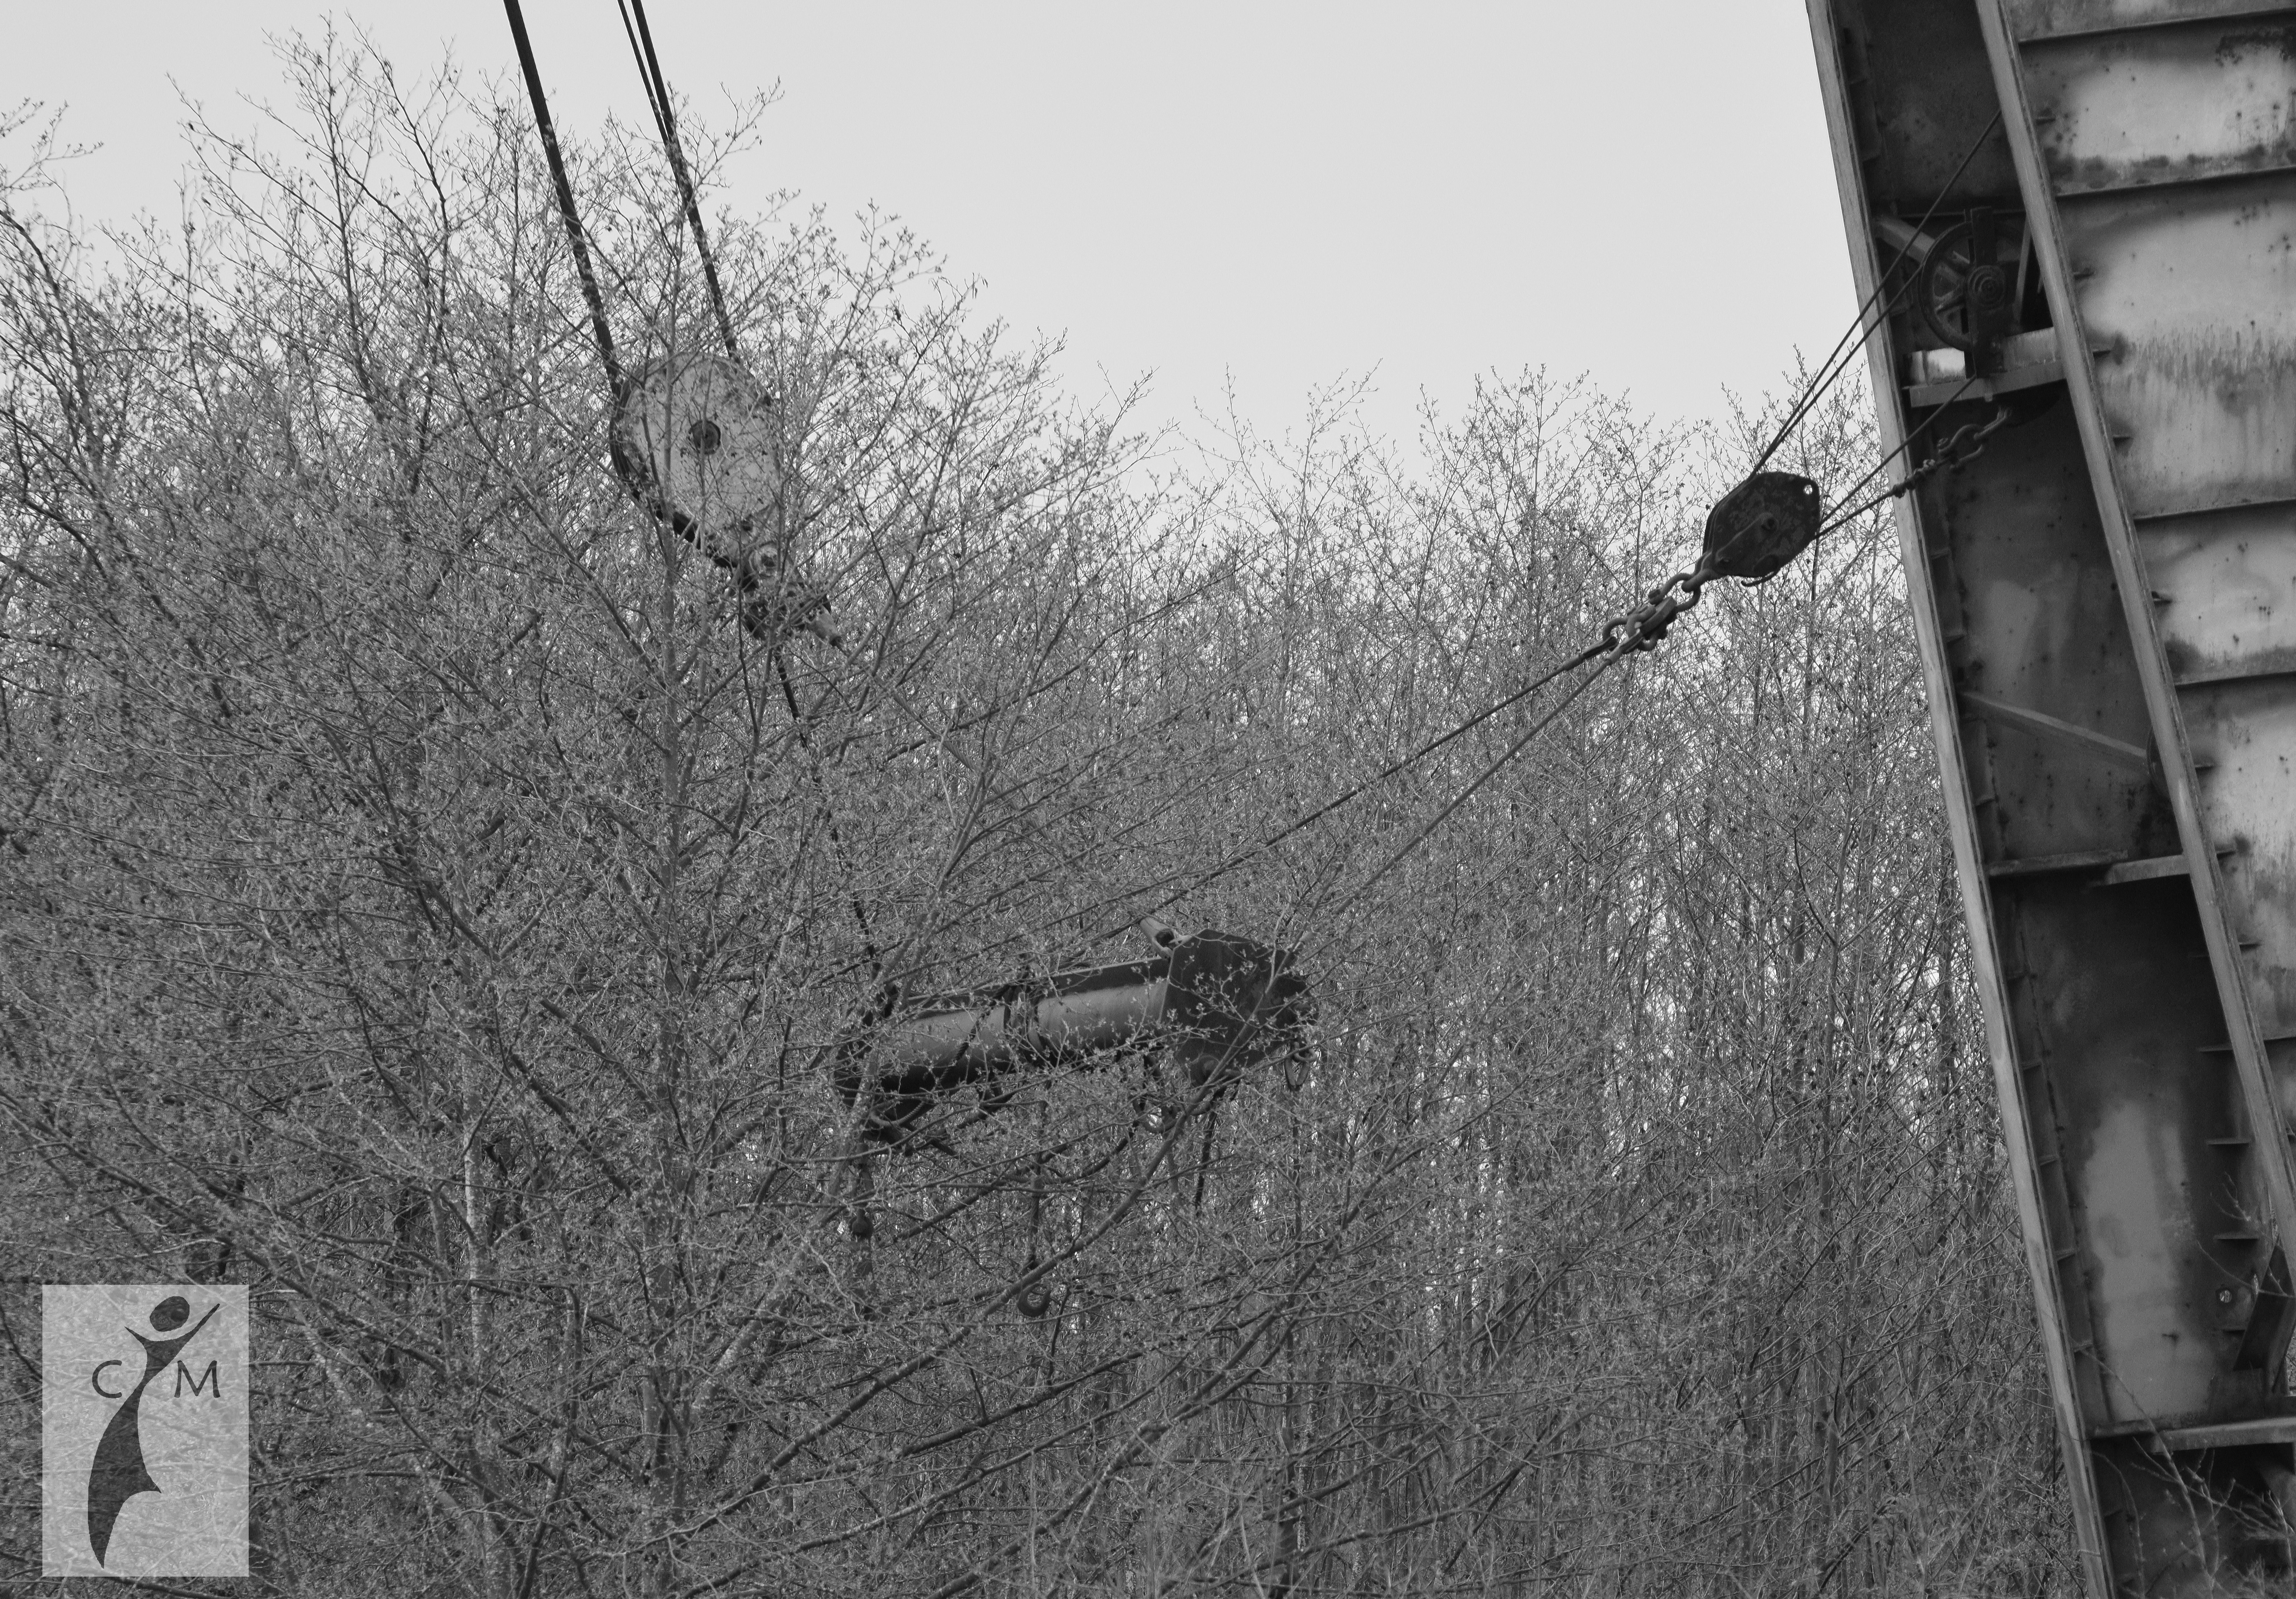 Rusting Crane on the Snohomish River